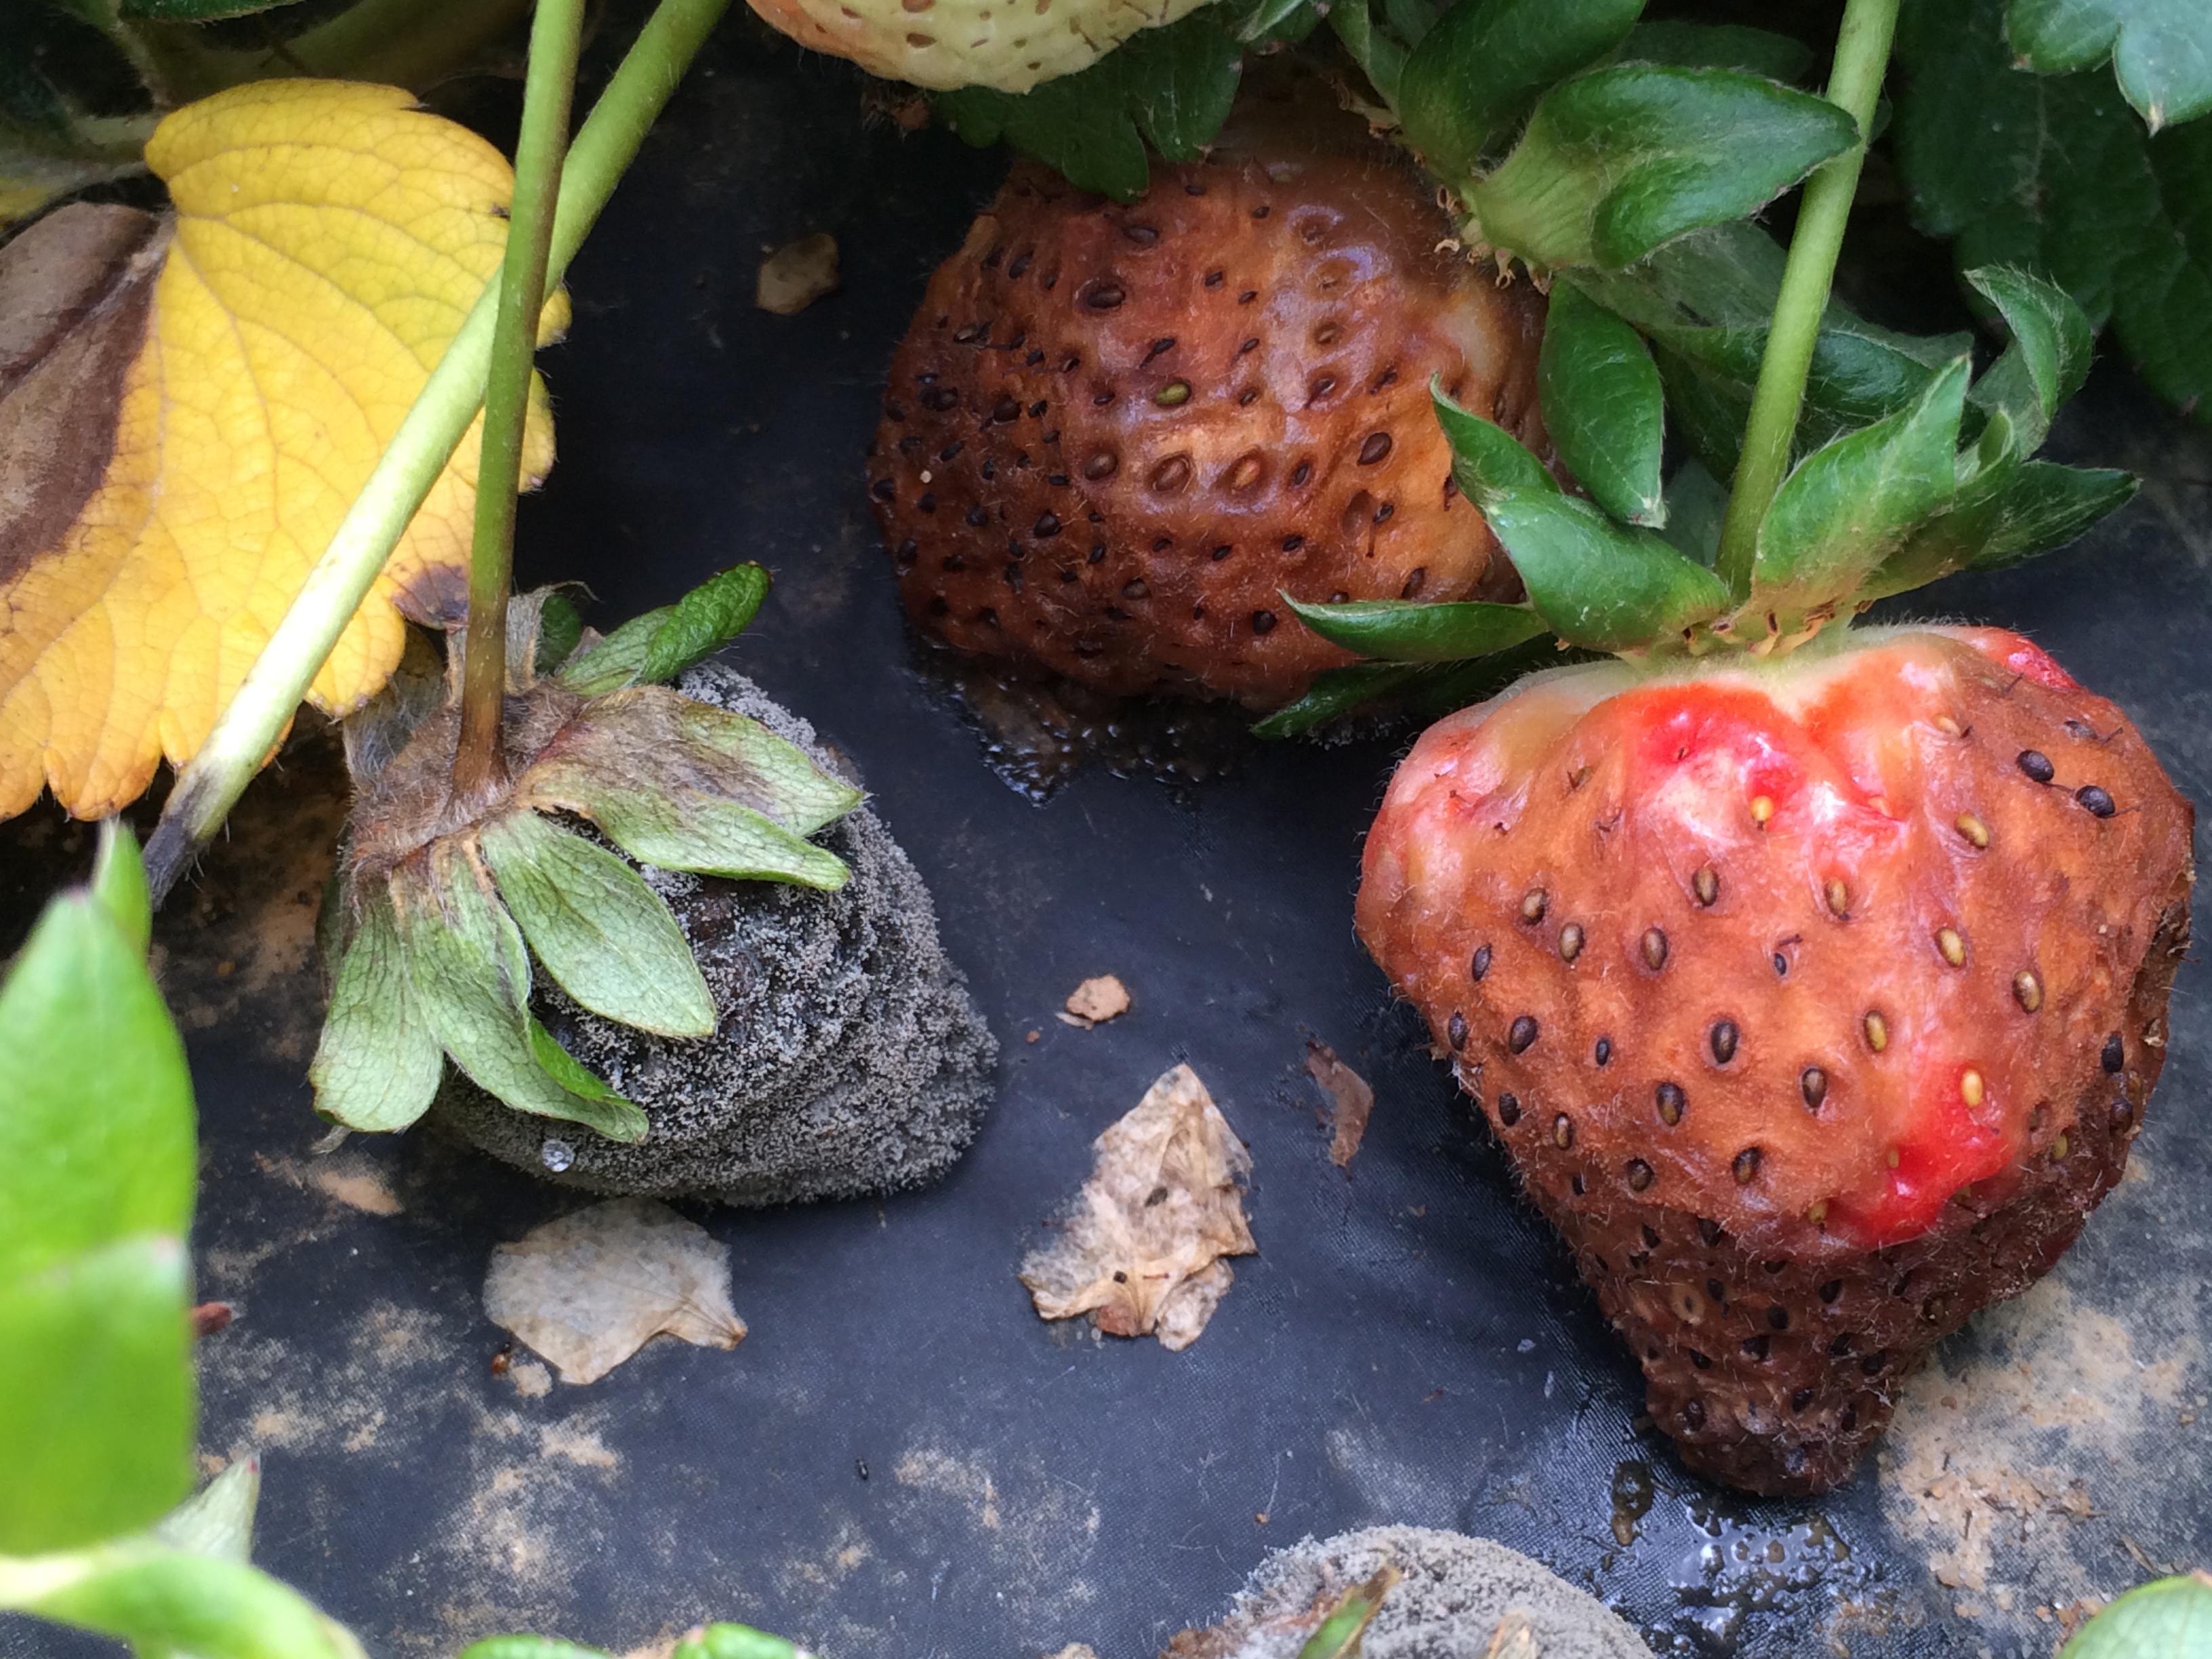 Symptoms and signs of gray mold (left) and anthracnose (right) on strawberries.